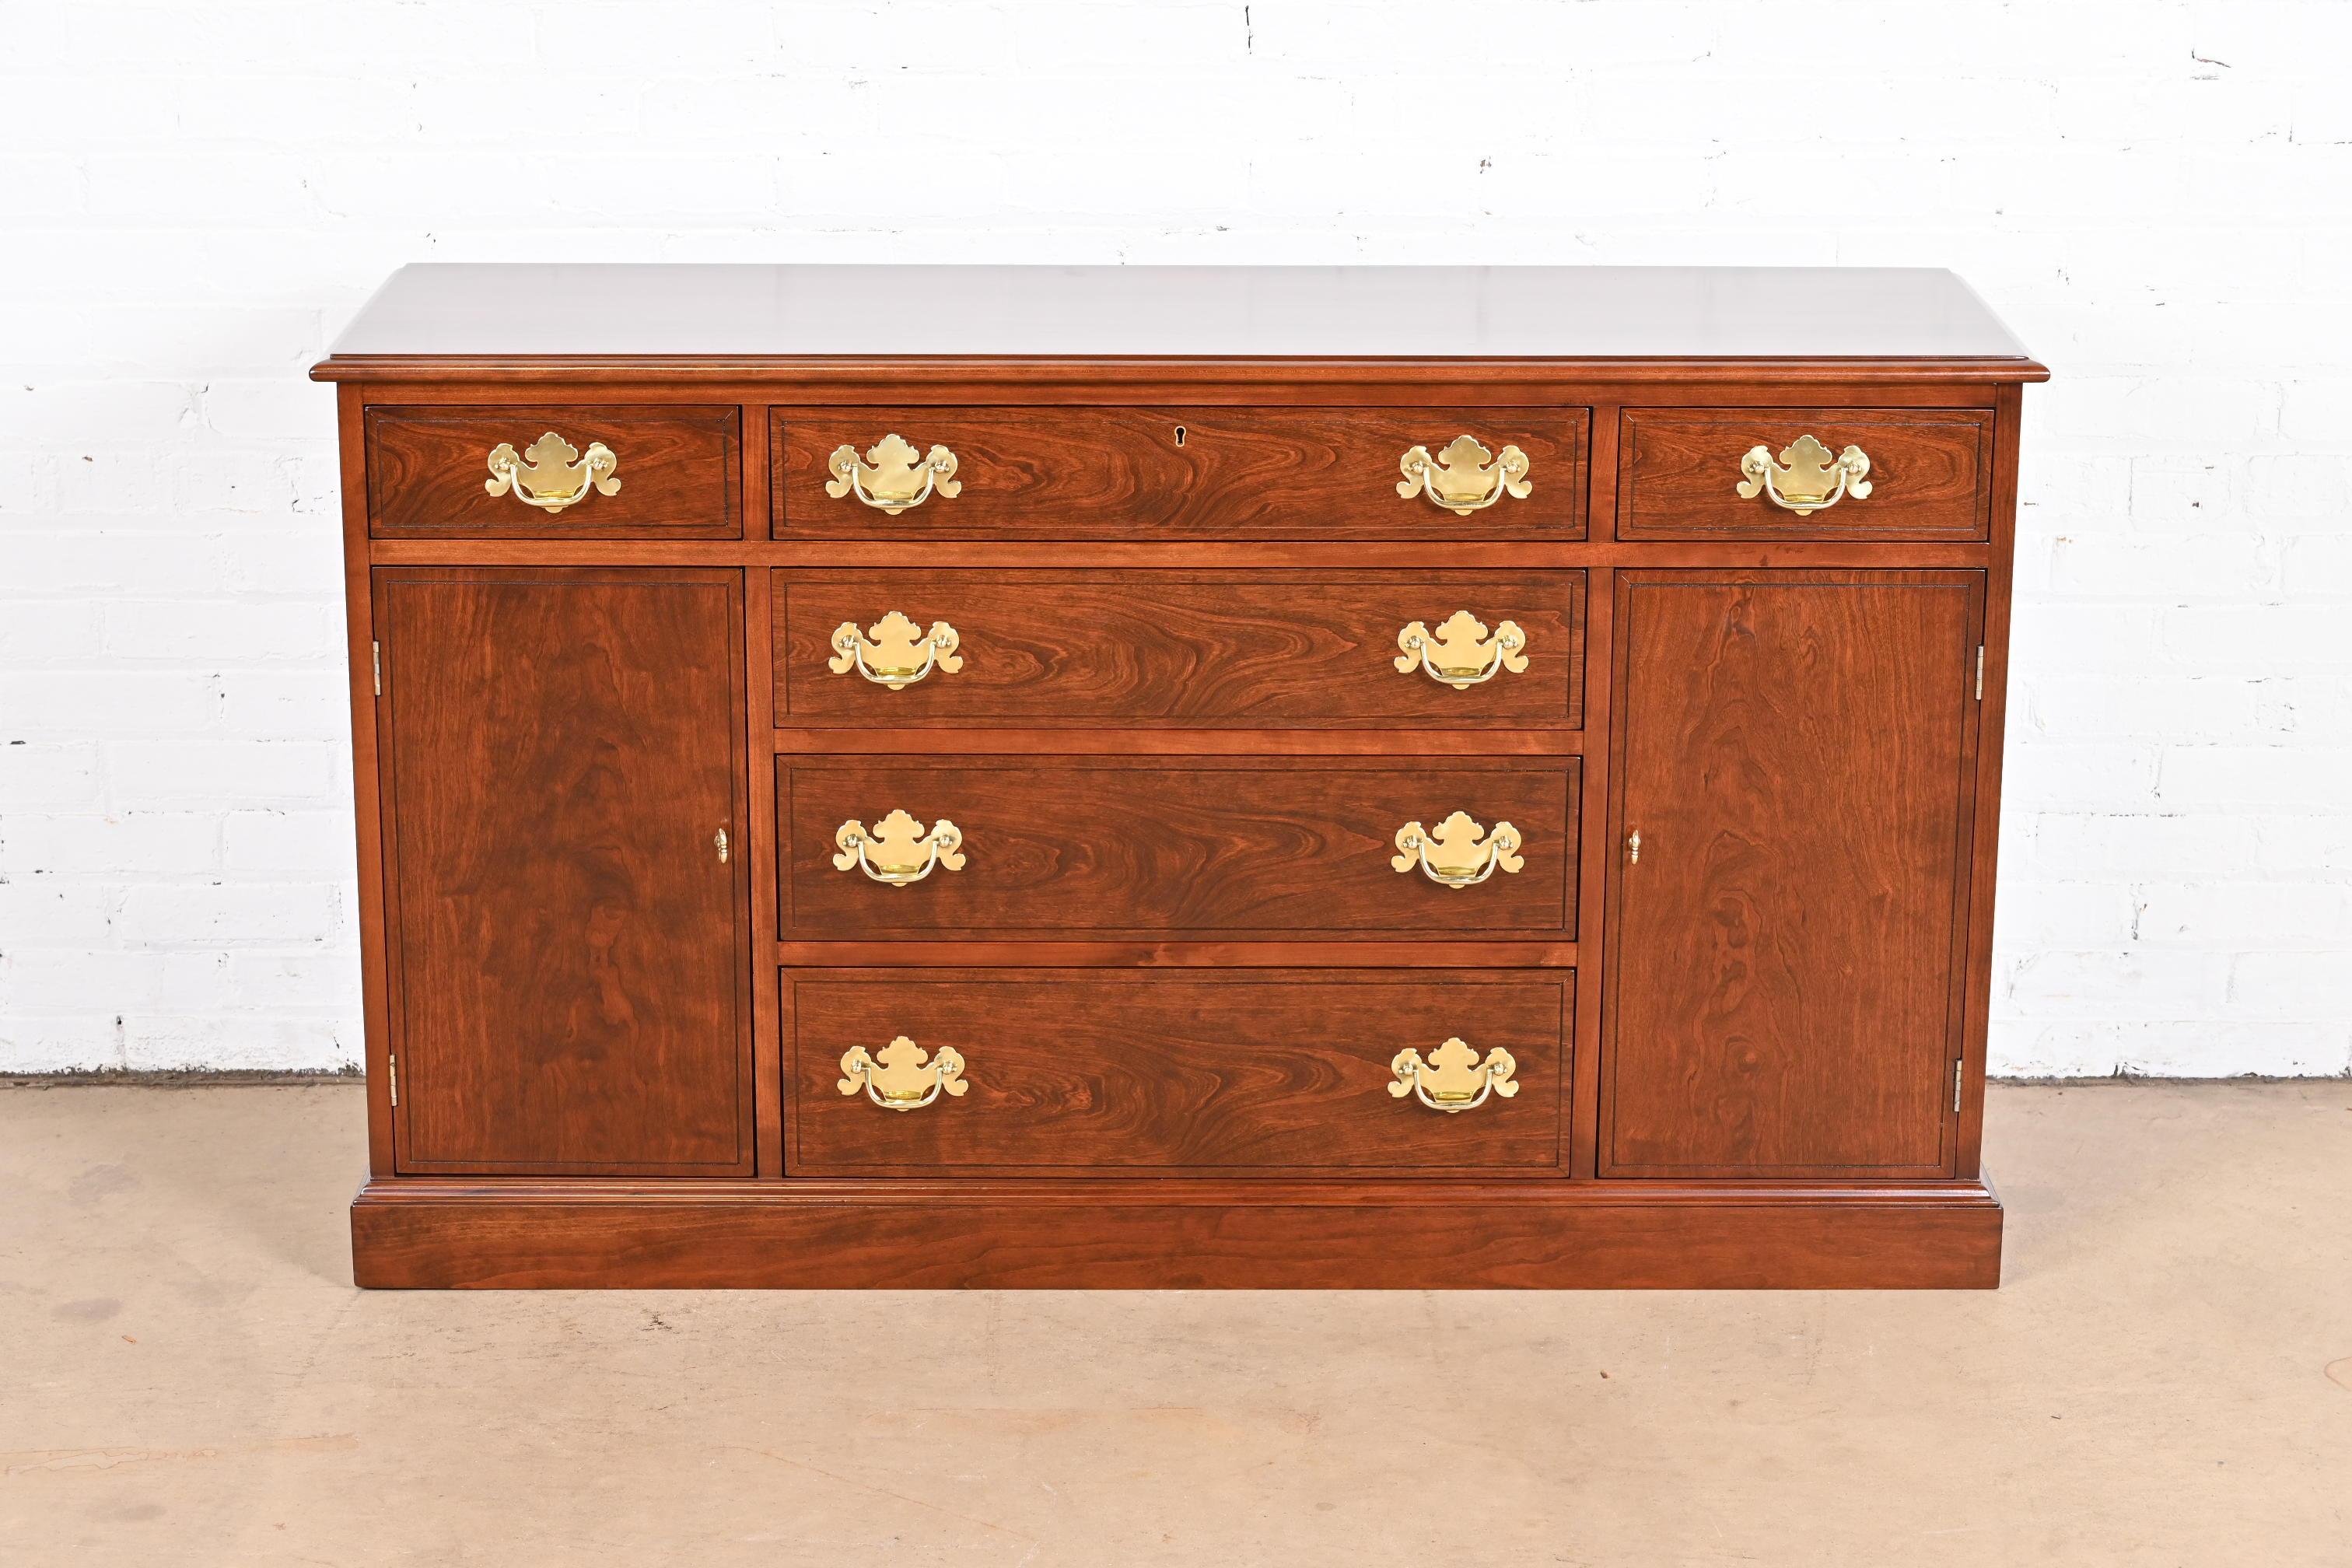 An exceptional Georgian or Chippendale style sideboard, credenza, or bar cabinet

By Henkel Harris

USA, 1977

Gorgeous solid cherry wood, with original brass hardware.

Measures: 55